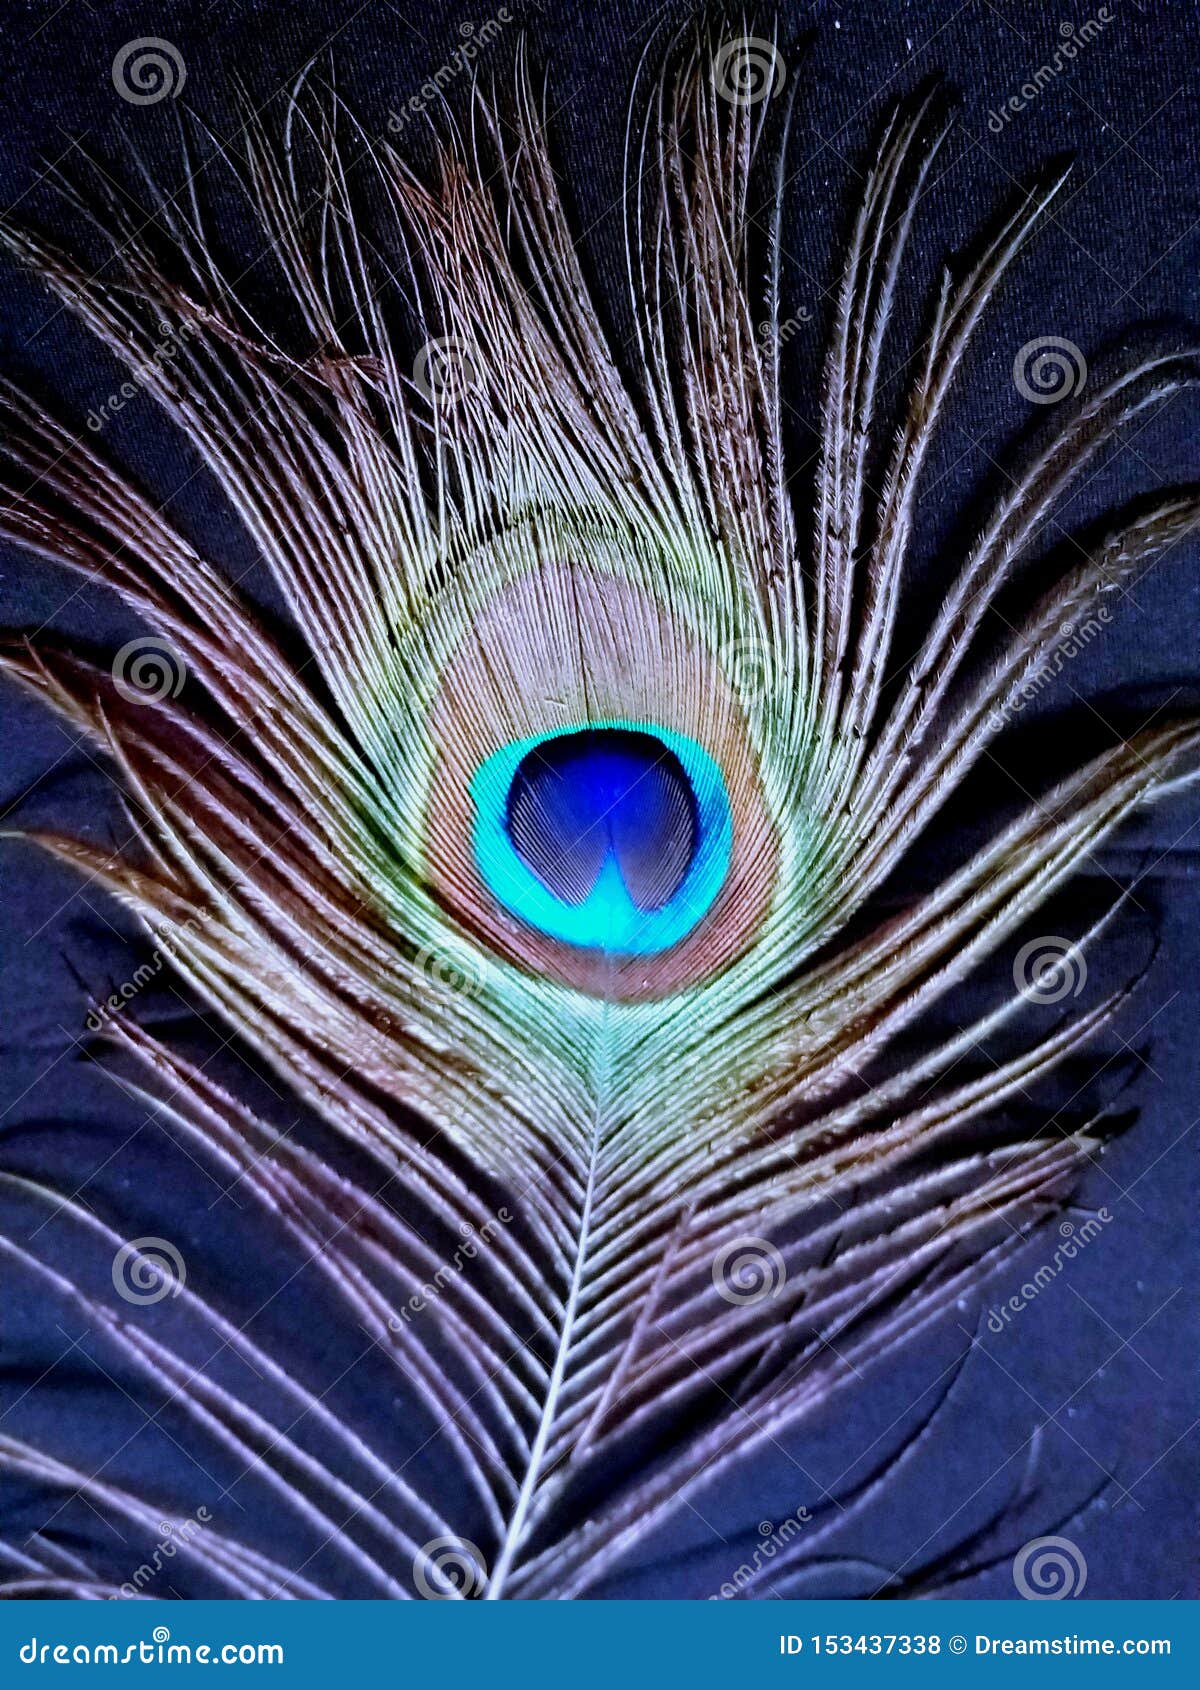 A Beautiful Peacock Feather on a Black Background Stock Photo - Image of  custom, asian: 153437338